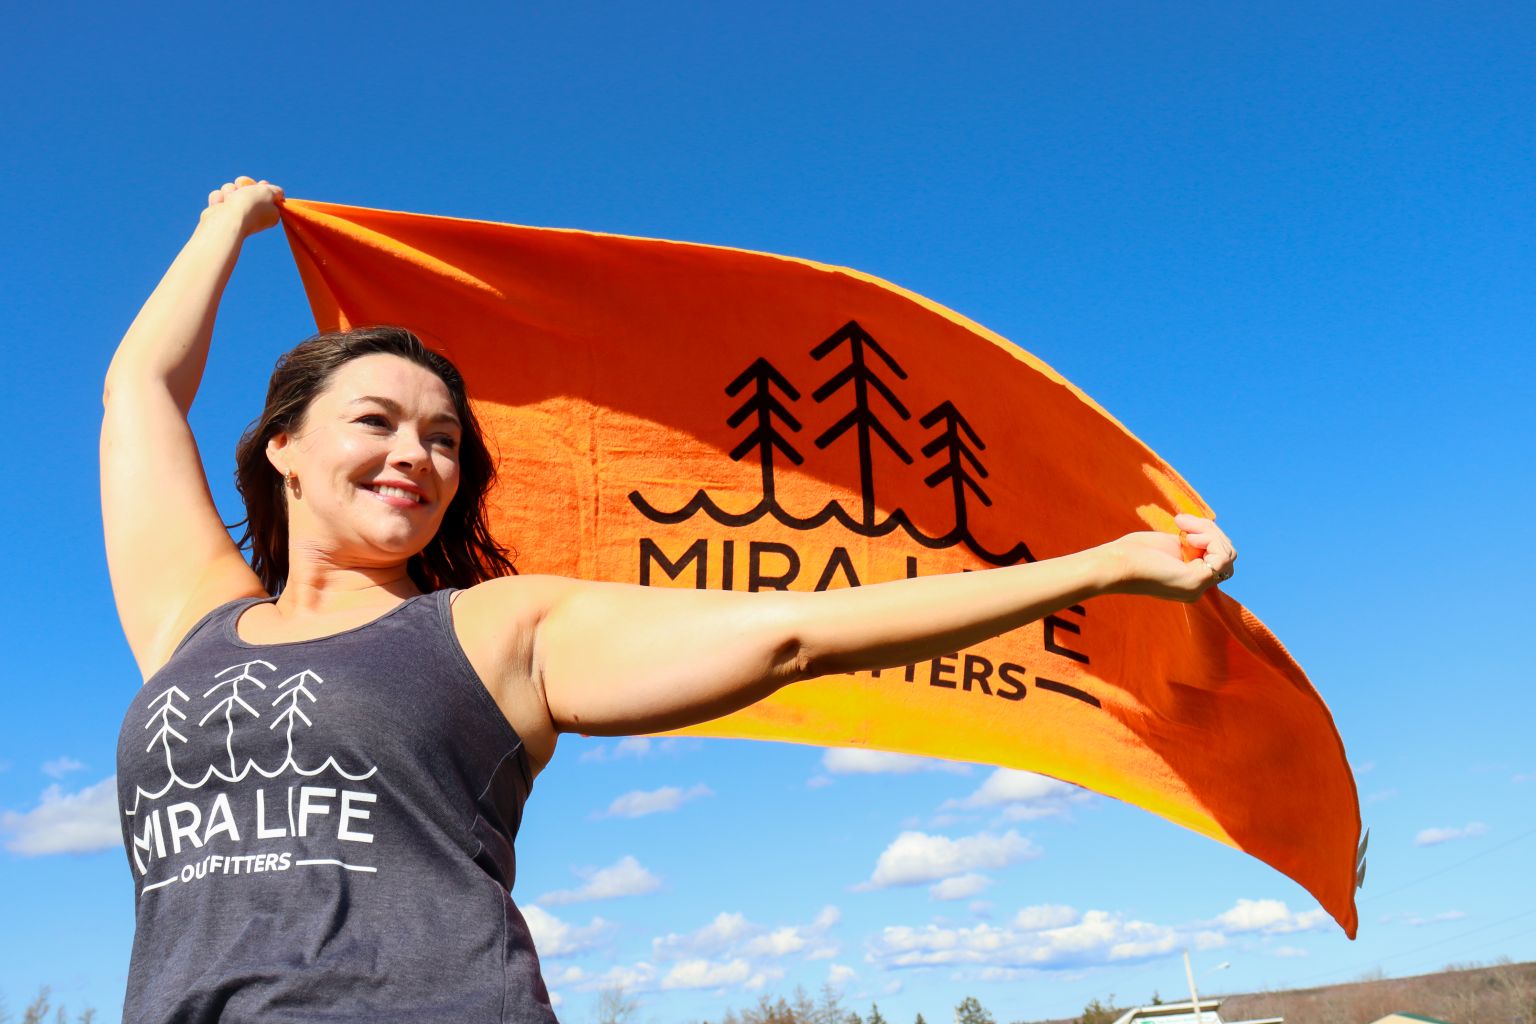 Mira Life Outfitters Spring Towels in the Colour Orange with Model wearing Spring Collection Tanktop